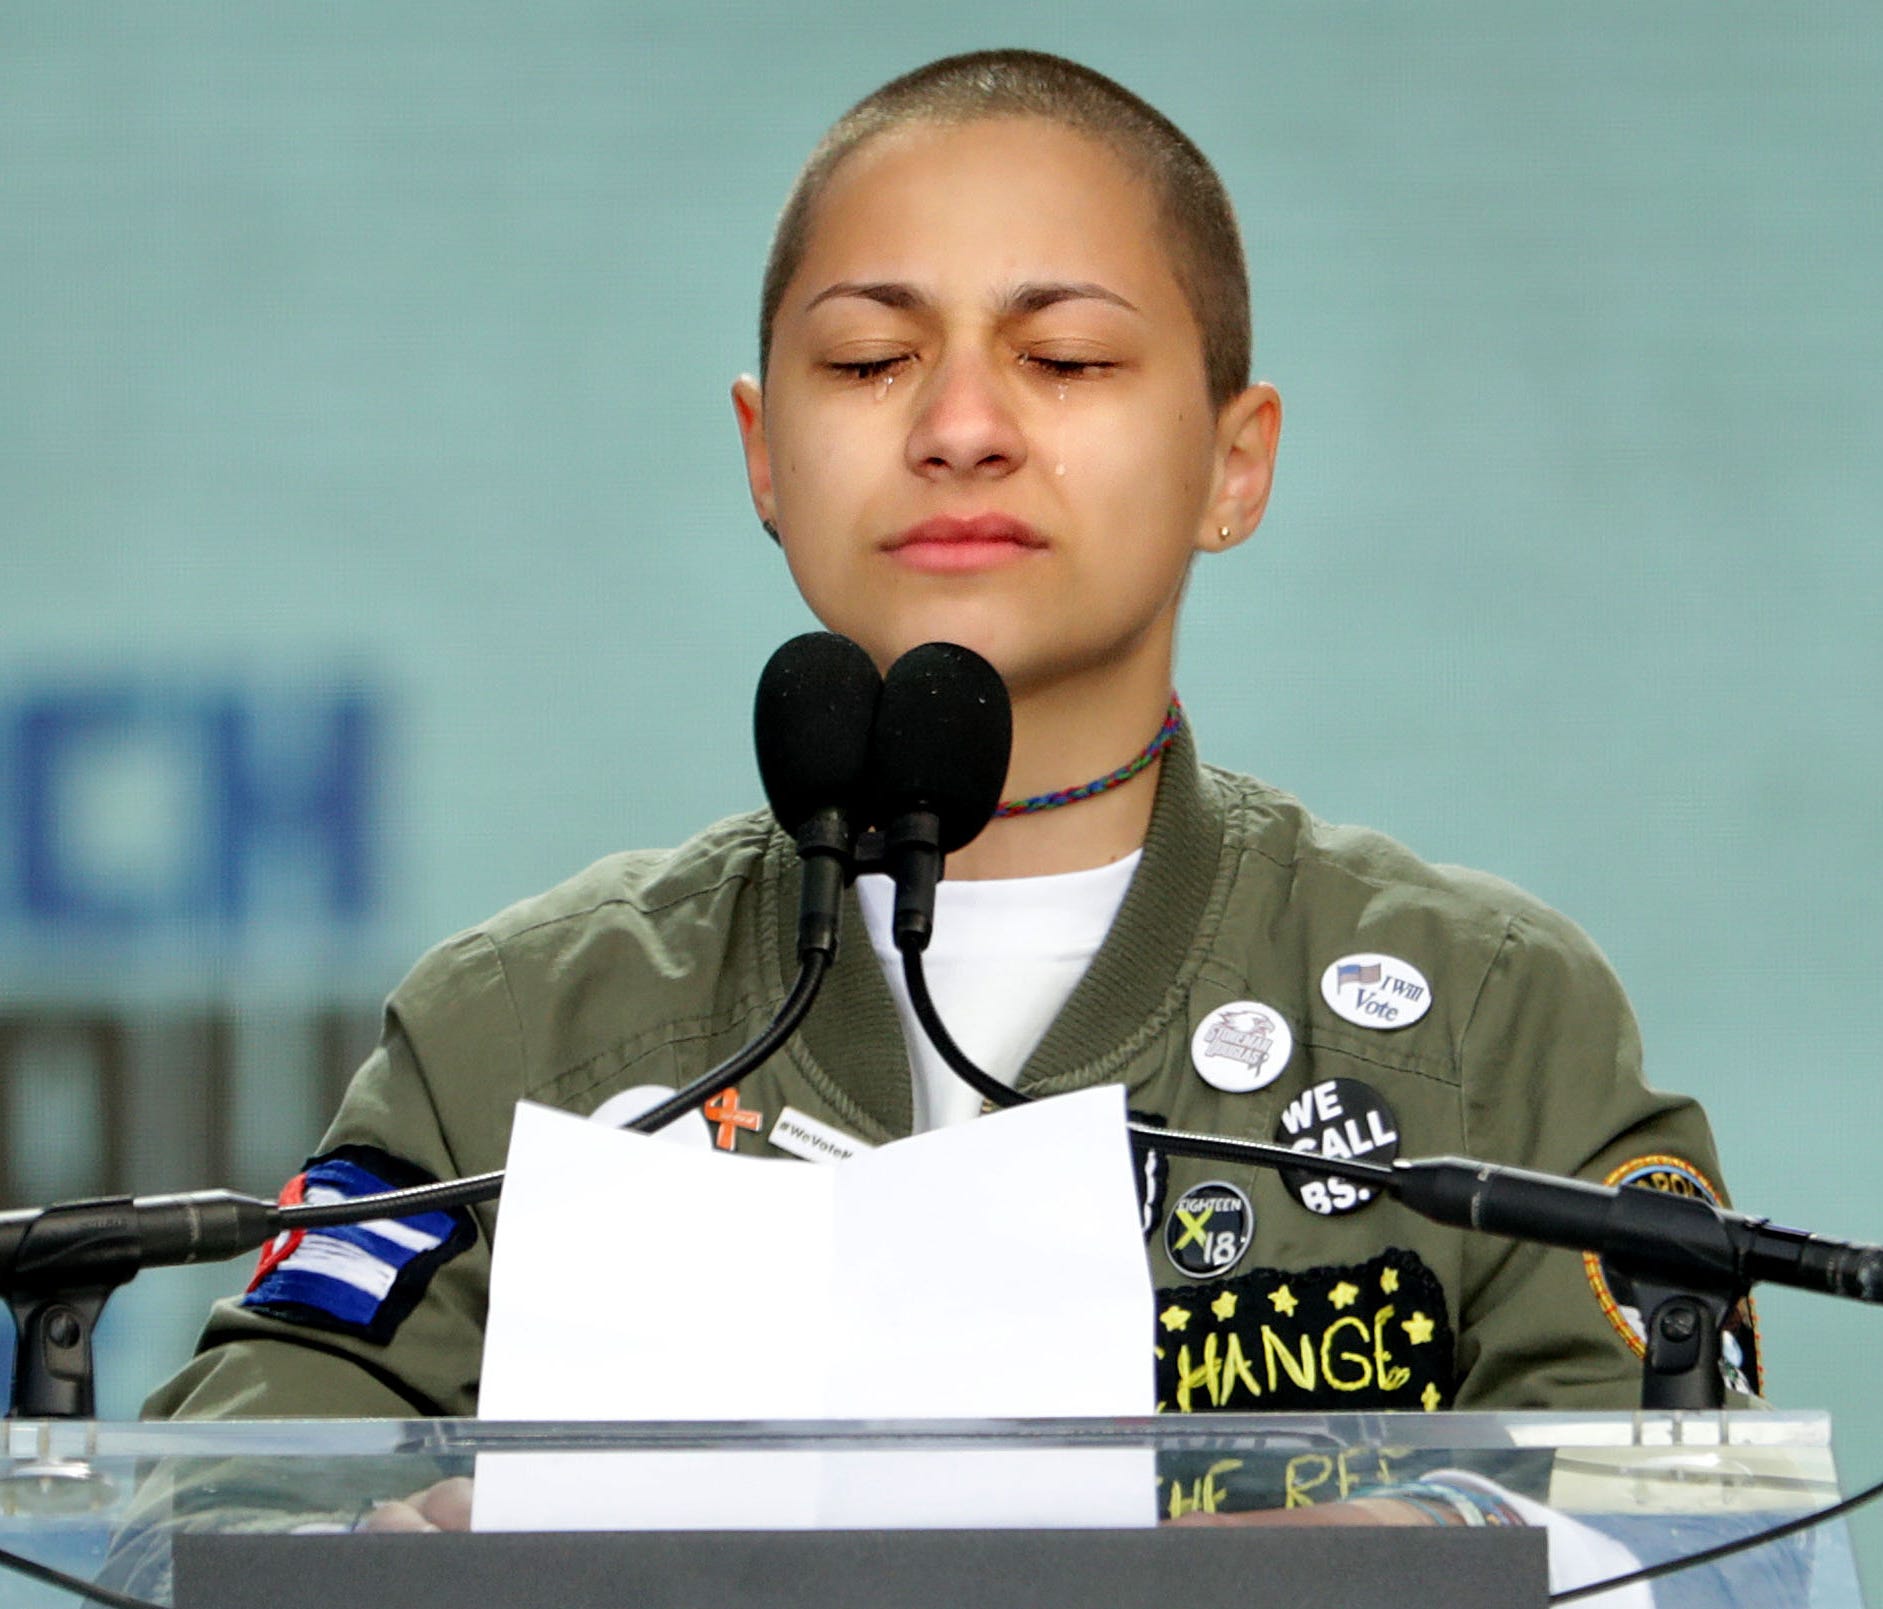 Tears roll down the face of Marjory Stoneman Douglas High School student Emma Gonzalez as she observes 6 minutes and 20 seconds of silence while addressing the March for Our Lives rally on March 24, 2018 in Washington, DC.